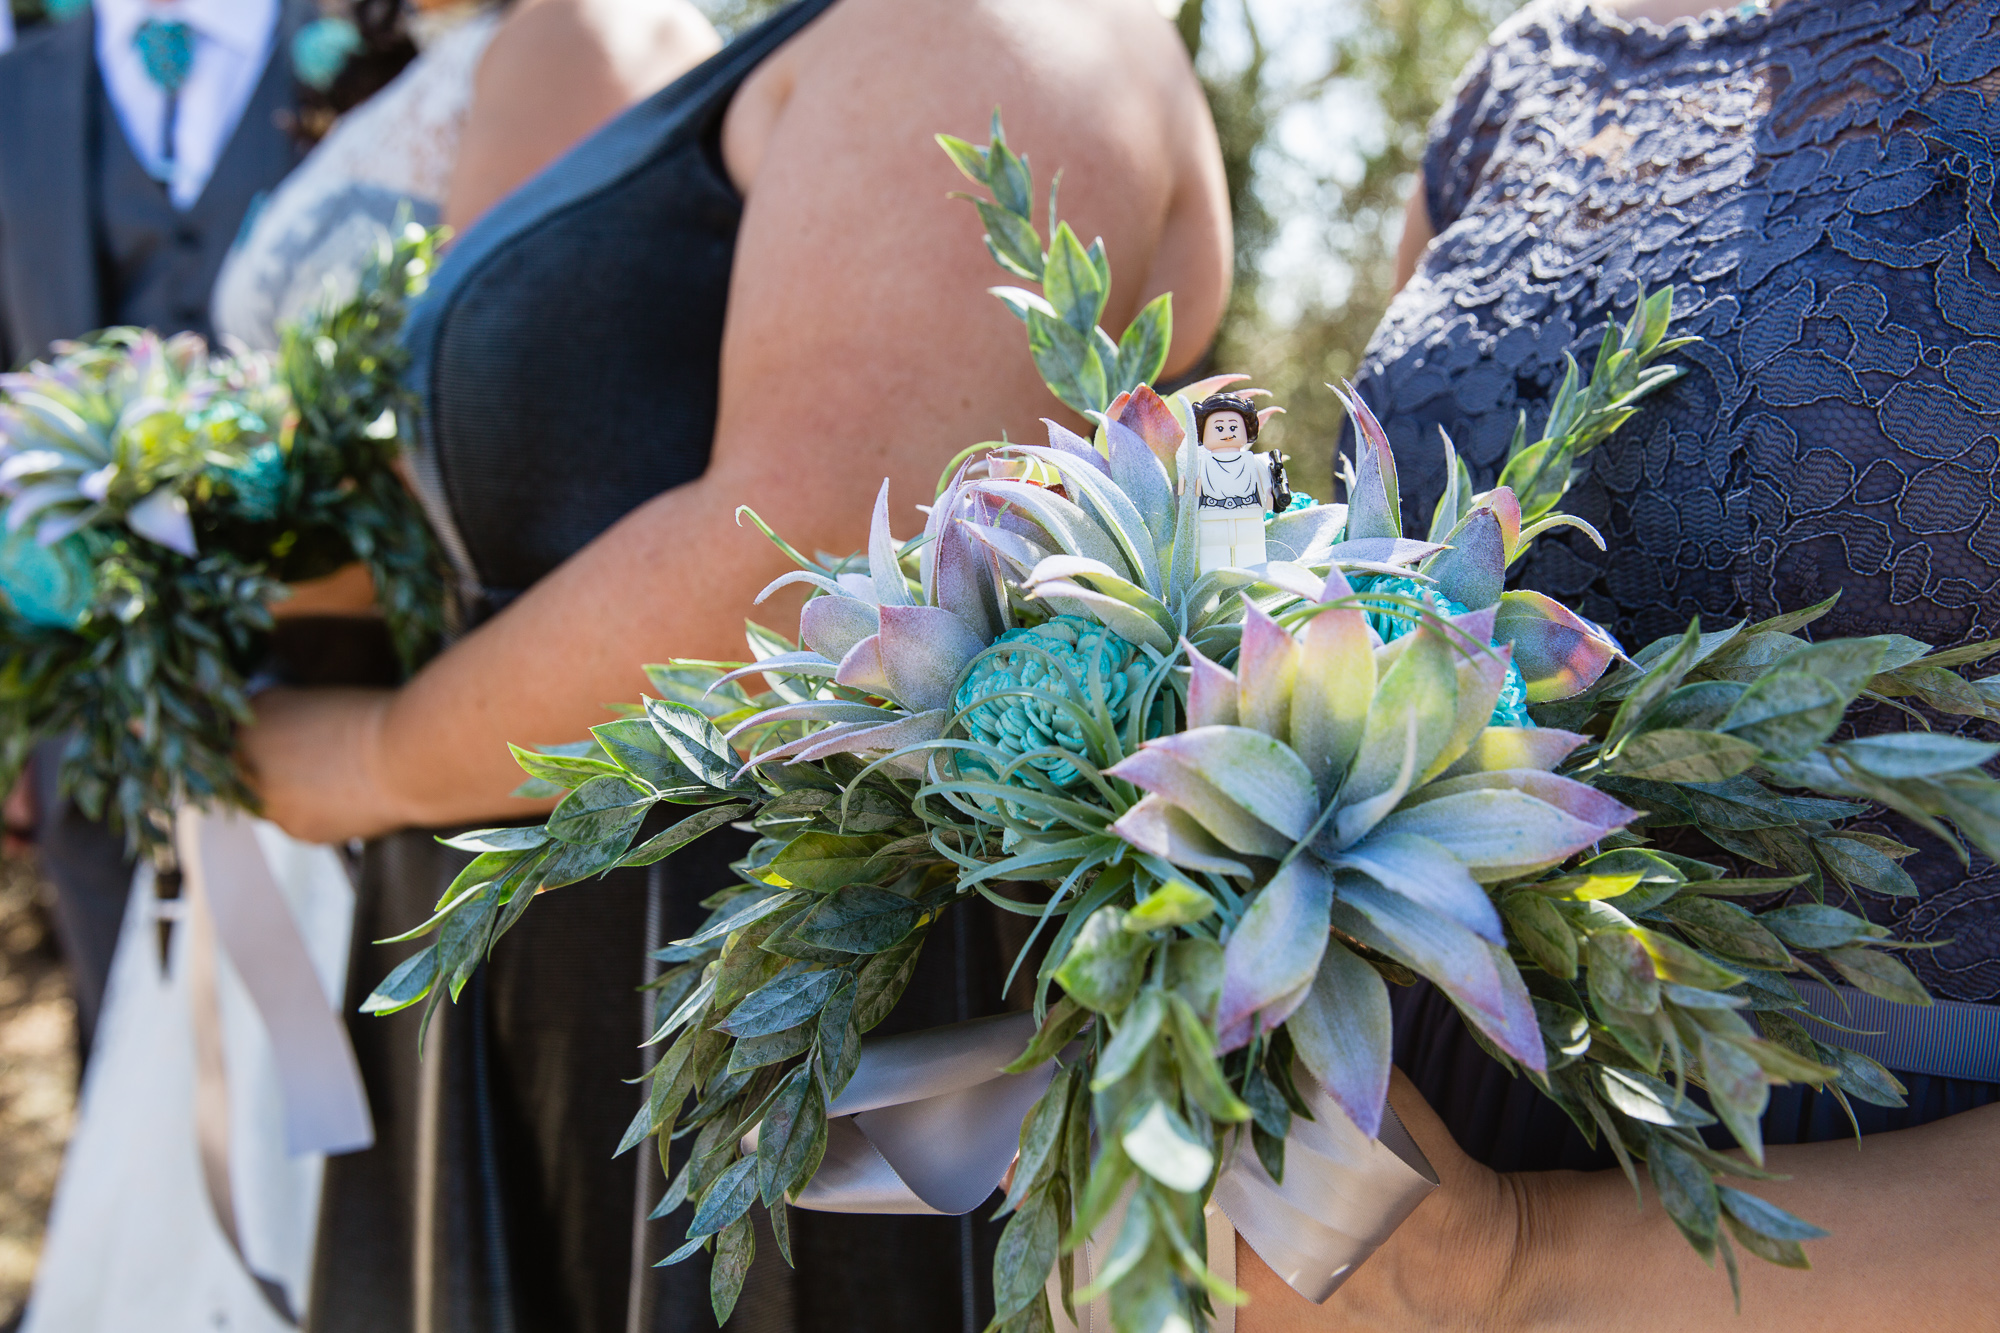 Star Wars Lego Princess Leia in a wood flower and succulent bridesmaids bouquet by Arizona wedding photographers PMA Photography.